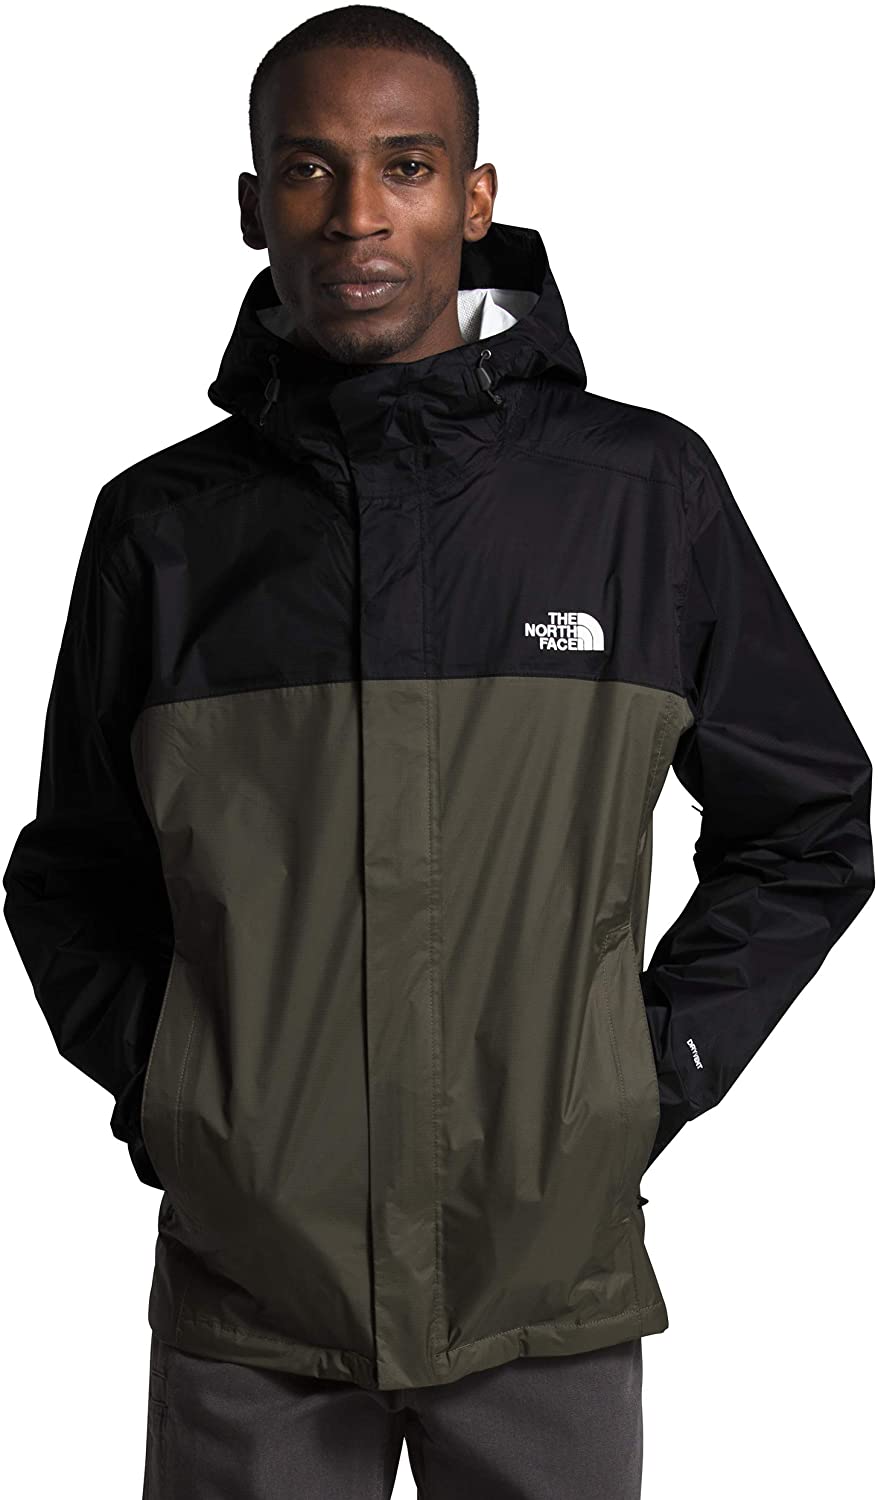 Men's The North Face Venture 2 Jacket in TNF Black/New Taupe Green from the front